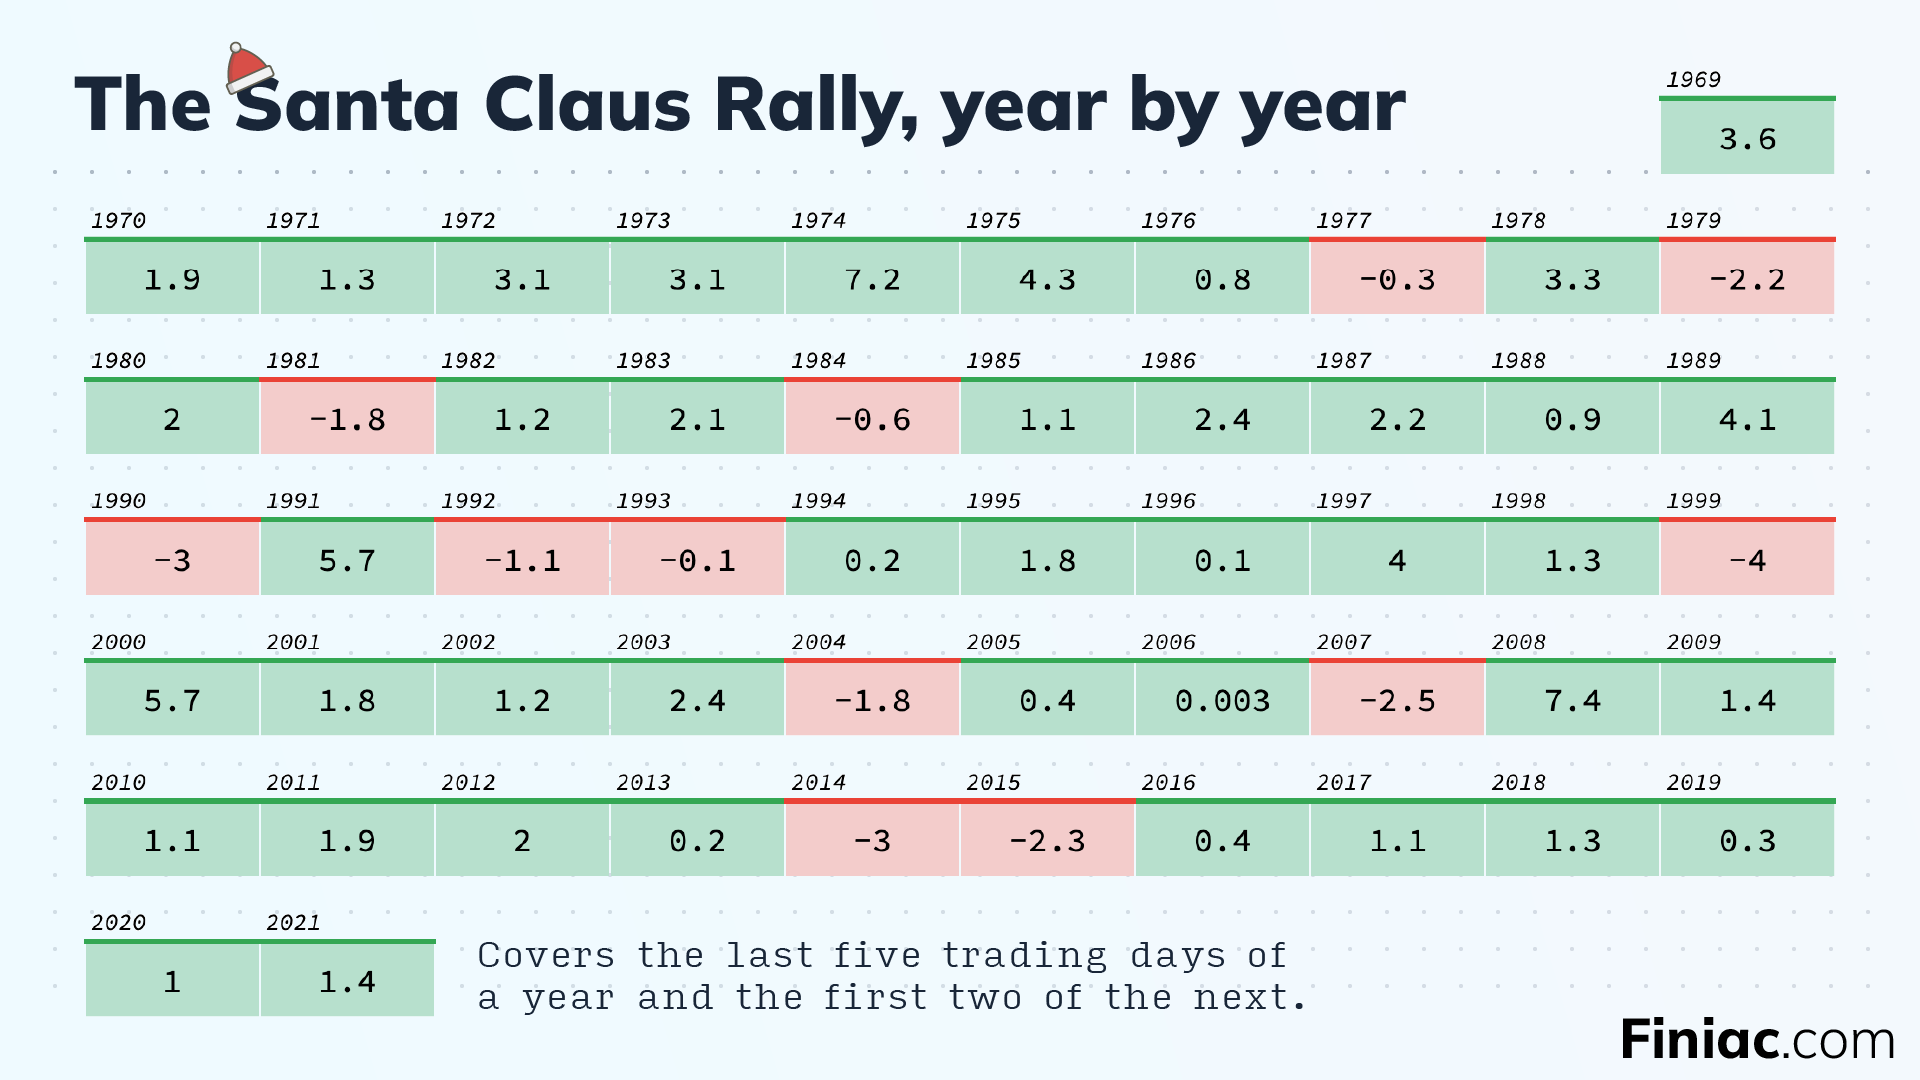 Results of the Santa Claus Rally since 1969.